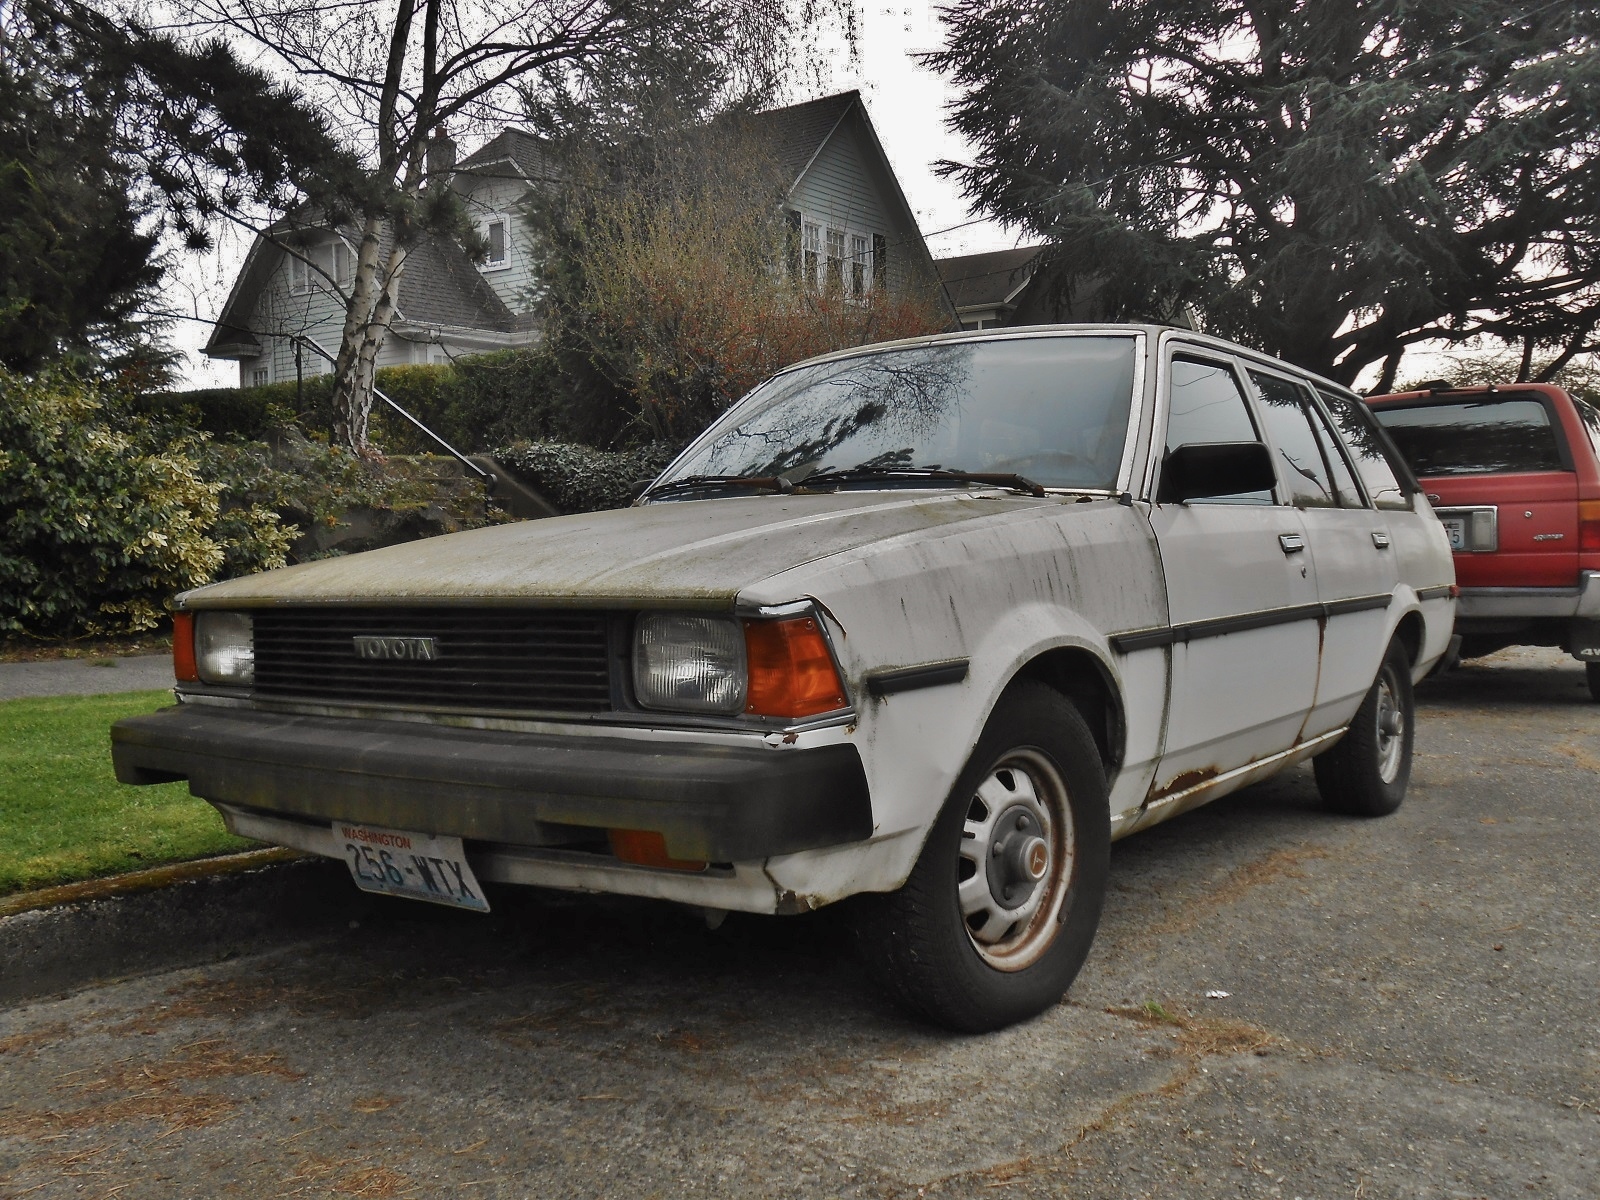 Seattle's Parked Cars: 1982 Toyota Corolla Wagon